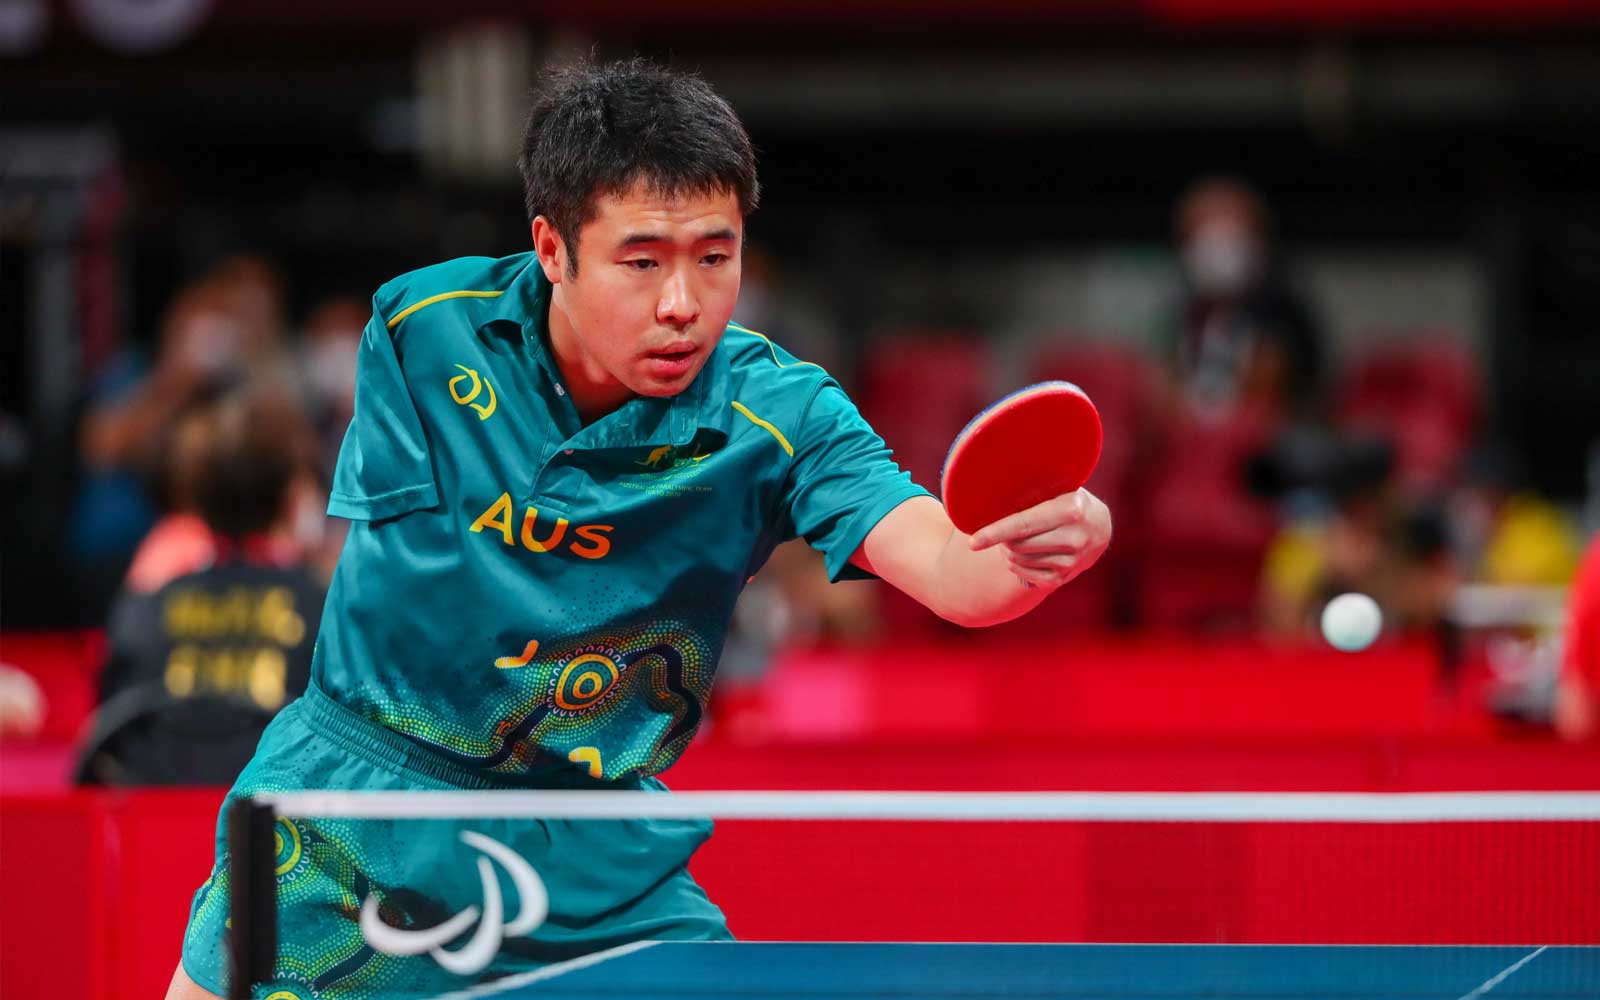 Male Para-table tennis player lean in to hit a ball with his paddle